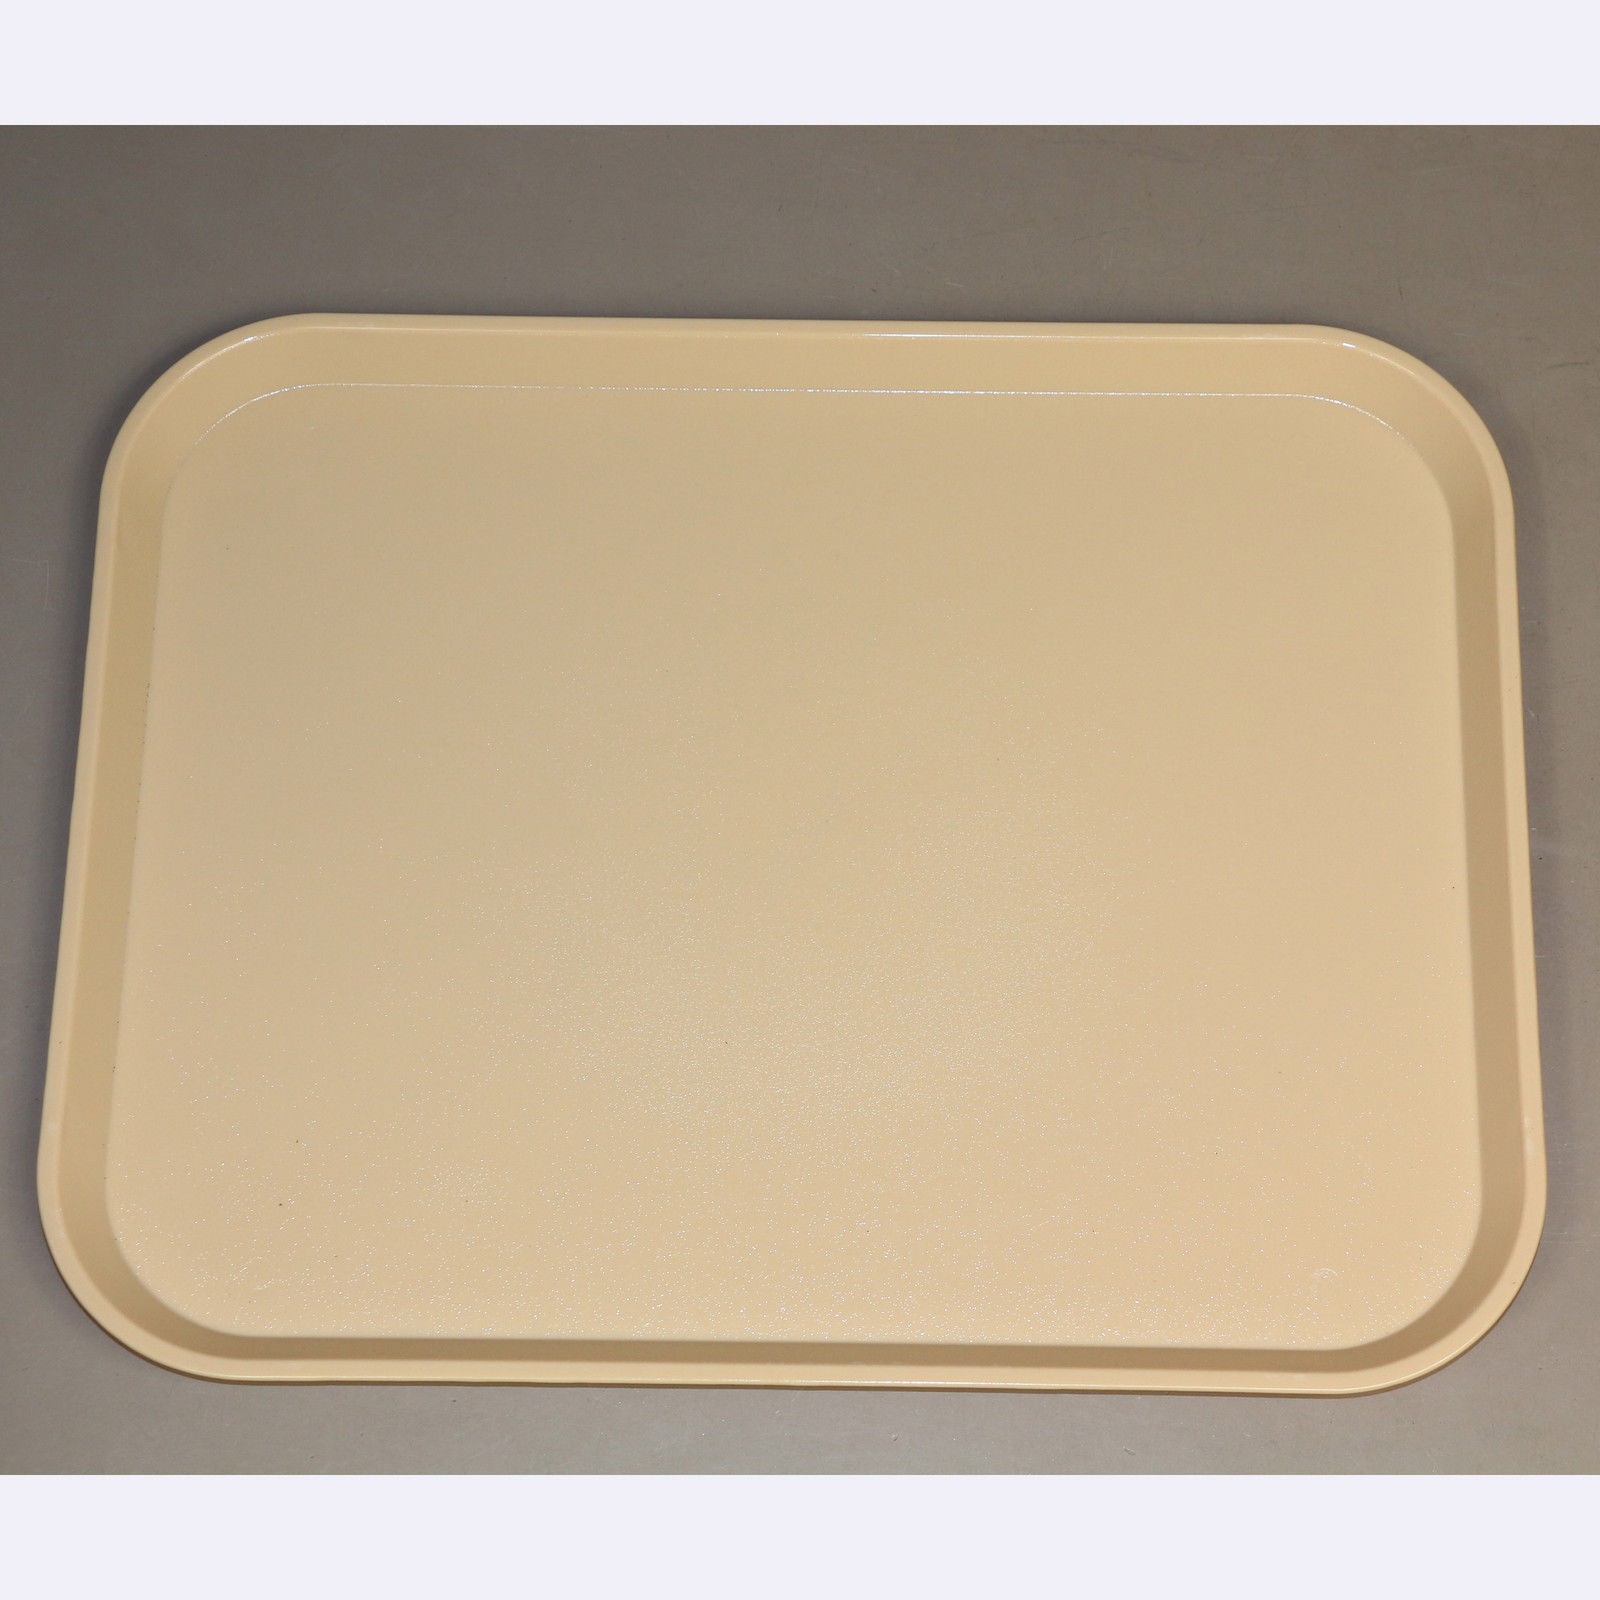 Cafeteria Polycarbonate Buffet  Fast Food Serving Rectuangle Tray Cambro Camwear 14x18 inch